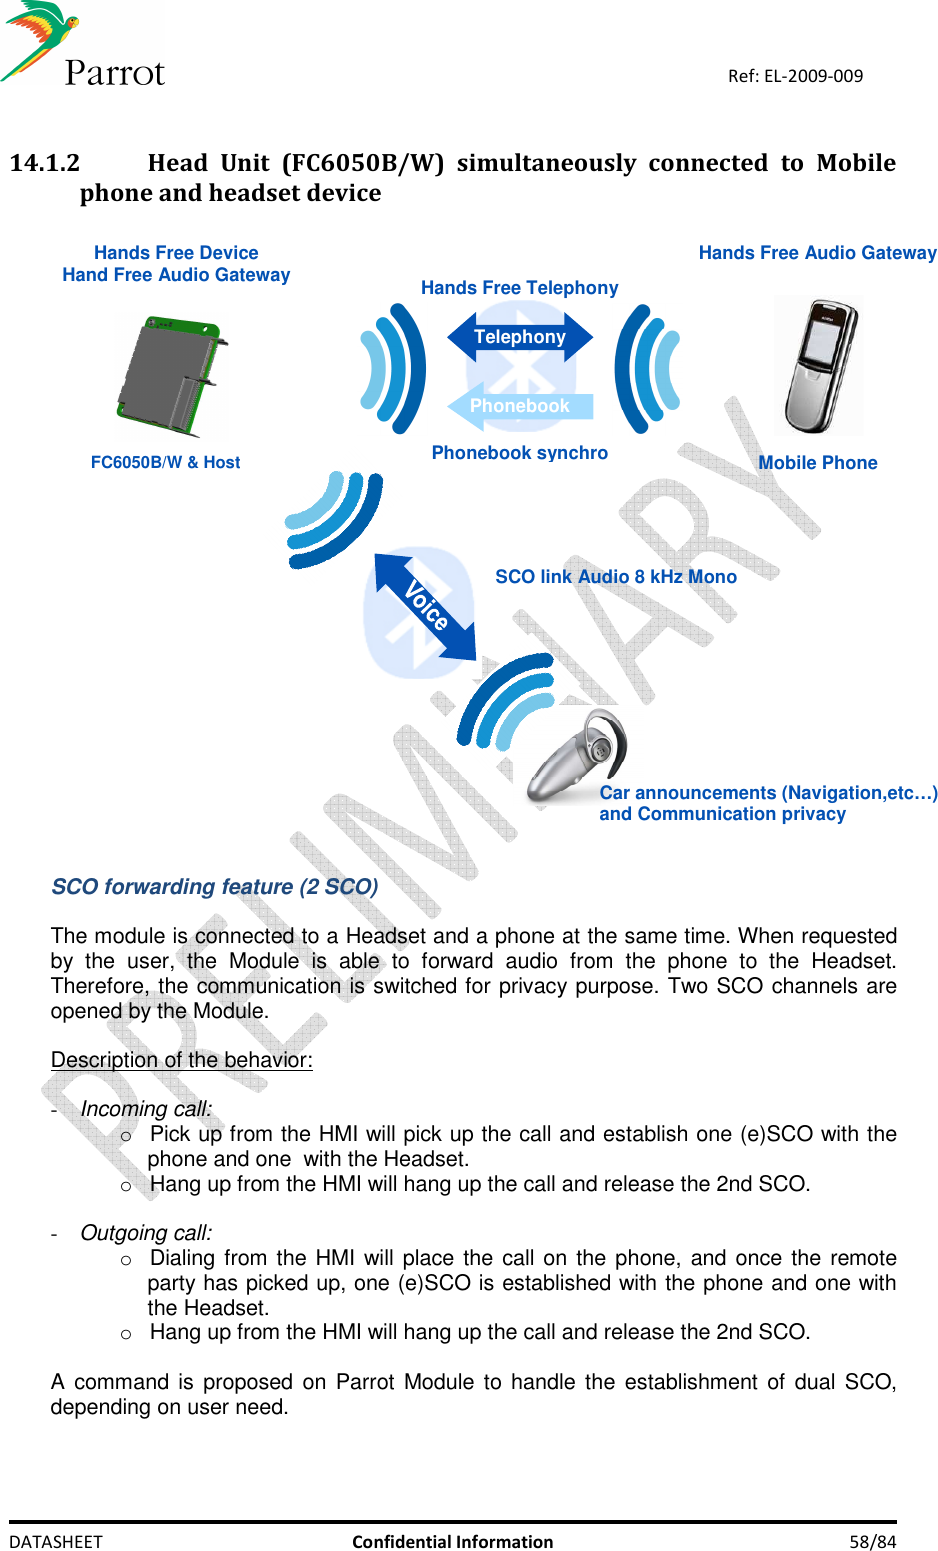    DATASHEET  Confidential Information  58/84 Ref: EL-2009-009  14.1.2 Head  Unit  (FC6050B/W)  simultaneously  connected  to  Mobile phone and headset device   SCO link Audio 8 kHz Mono Car announcements (Navigation,etc…)  and Communication privacy Hands Free Audio Gateway Hands Free Device Hand Free Audio GatewayMobile PhoneHands Free TelephonyPhonebook synchroTelephonyPhonebookFC6050B/W &amp; Host  SCO forwarding feature (2 SCO)  The module is connected to a Headset and a phone at the same time. When requested by  the  user,  the  Module  is  able  to  forward  audio  from  the  phone  to  the  Headset. Therefore, the communication is switched for privacy purpose. Two SCO channels are opened by the Module.  Description of the behavior:  - Incoming call: o  Pick up from the HMI will pick up the call and establish one (e)SCO with the phone and one  with the Headset. o  Hang up from the HMI will hang up the call and release the 2nd SCO.  - Outgoing call: o  Dialing from the HMI will place the call on the phone, and once the remote party has picked up, one (e)SCO is established with the phone and one with the Headset. o  Hang up from the HMI will hang up the call and release the 2nd SCO.  A command is proposed on Parrot  Module to handle the establishment of  dual SCO, depending on user need. 